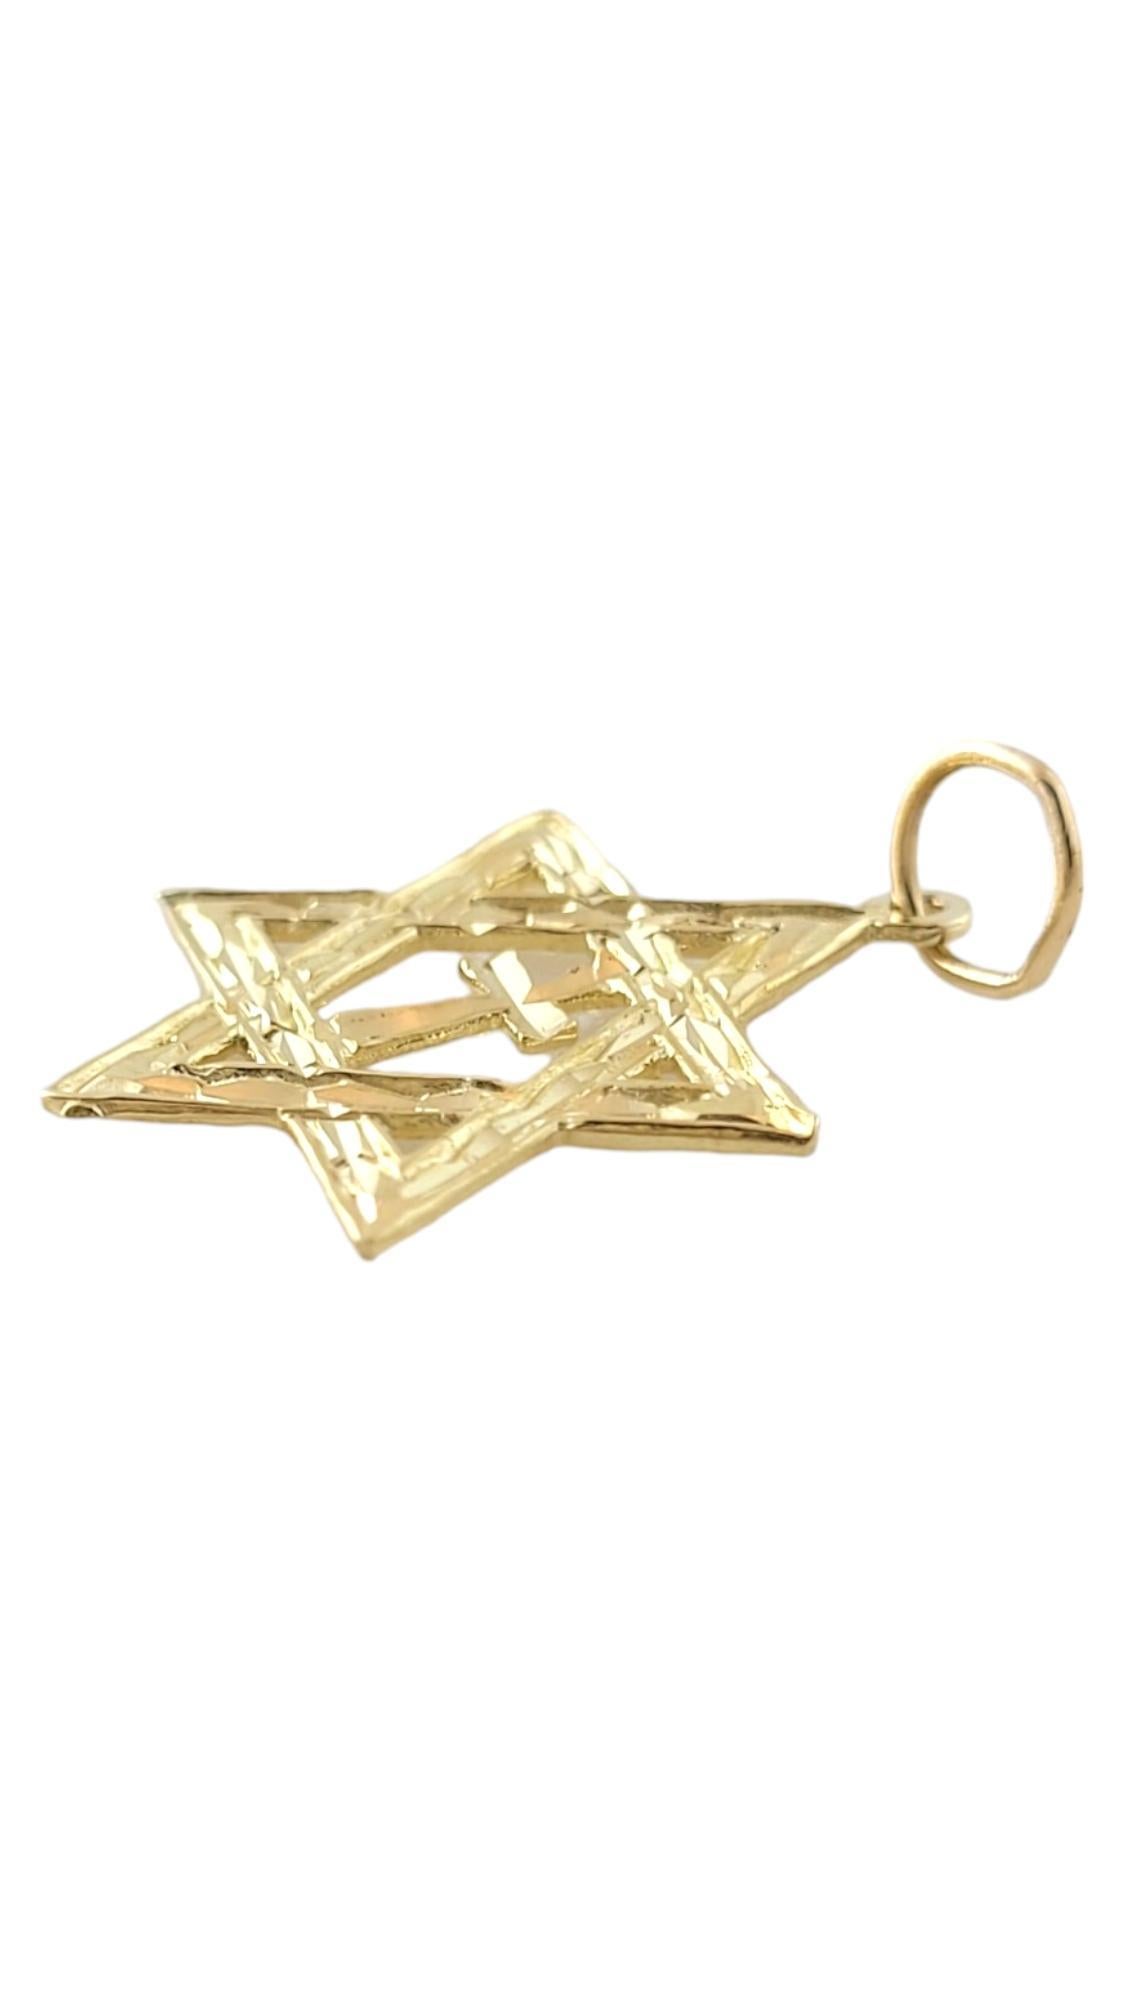 Vintage 14K Yellow Gold Messianic Cross Pendant

This 14K gold Messianic Cross is a symbol embraced by Messianic Jews - those who follow the laws and teachings of Judaism while accepting the divine messianic status of Jesus.

Size: 20.8mm X 16.0mm X